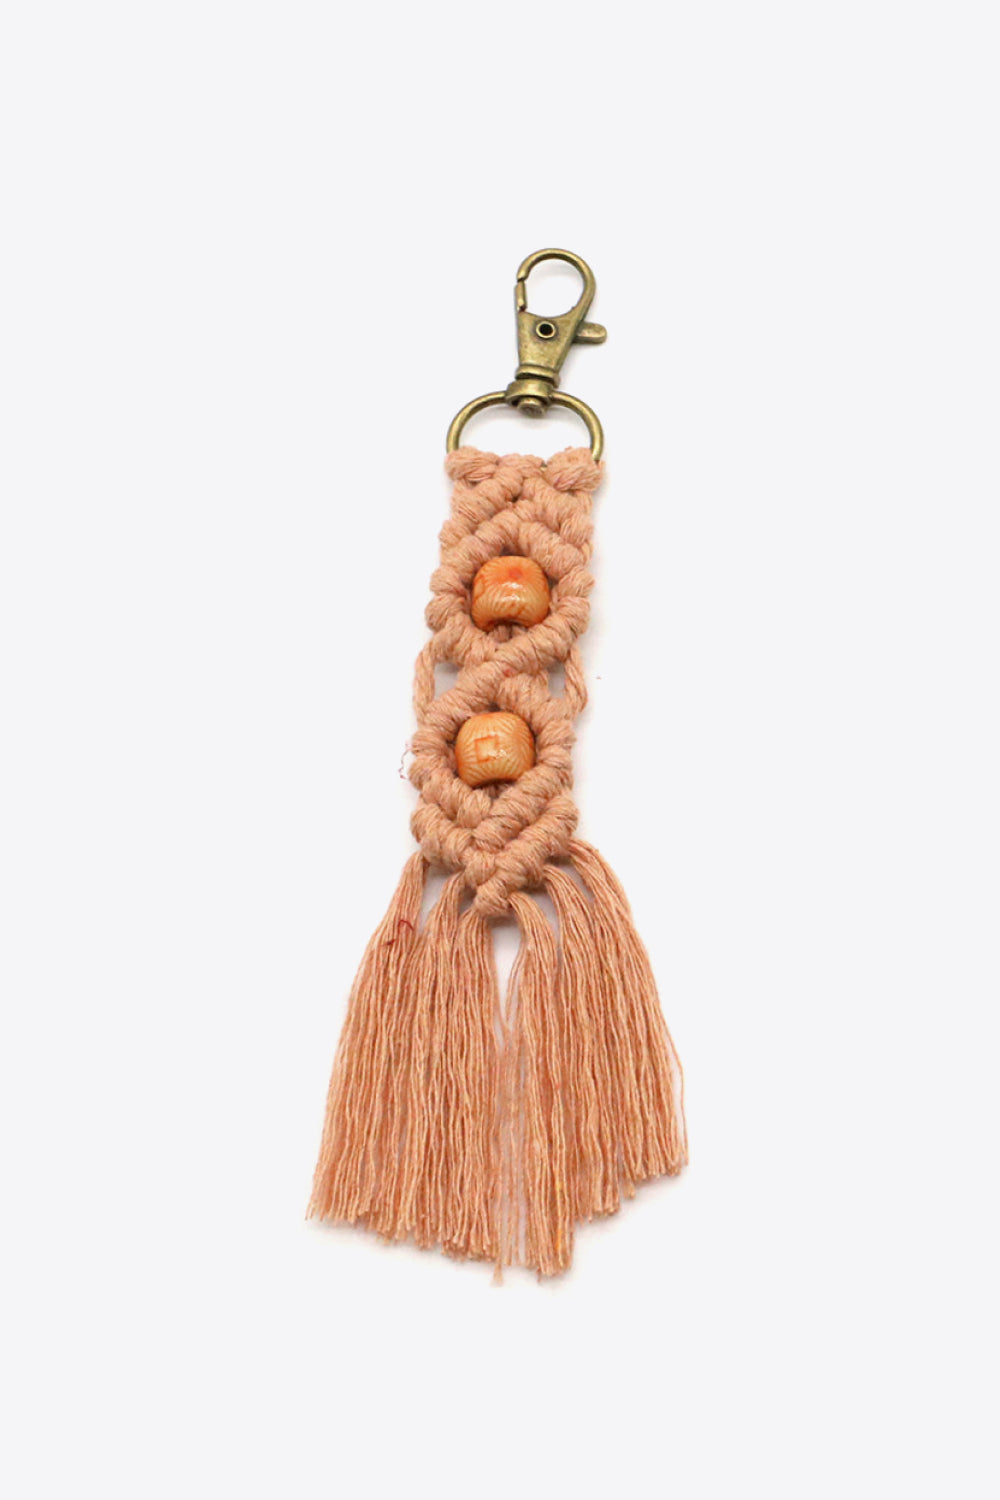 Trendsi Cupid Beauty Supplies Pale Blush / One Size Keychains Assorted 4-Pack Handmade Macrame Fringe Keychain